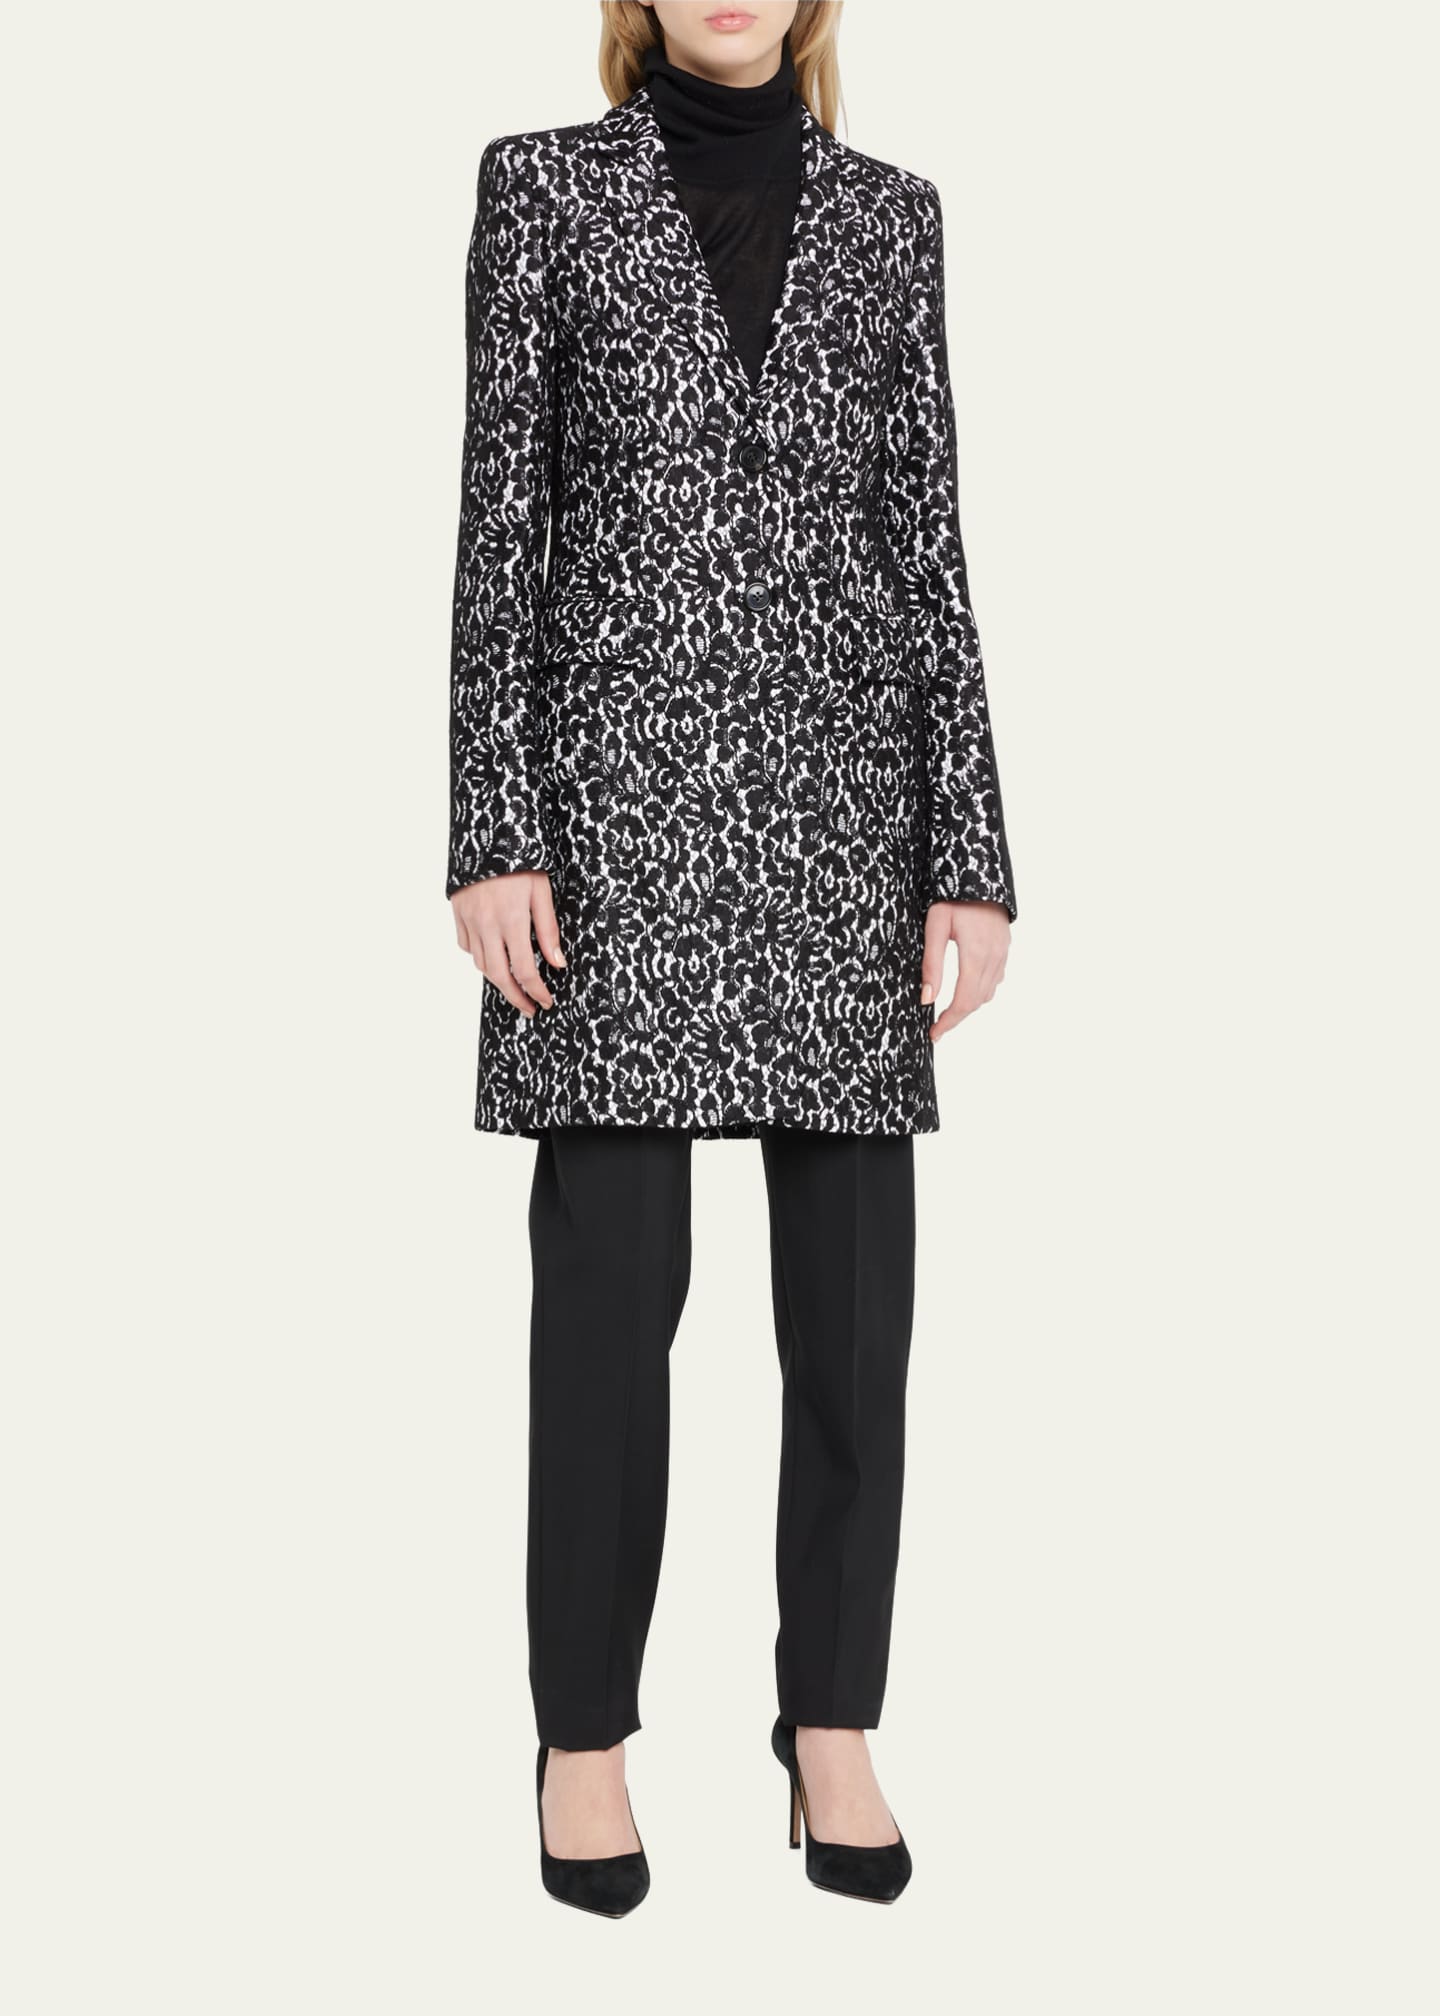 Michael Kors Collection Floral Lace Reefer Coat - Bergdorf Goodman